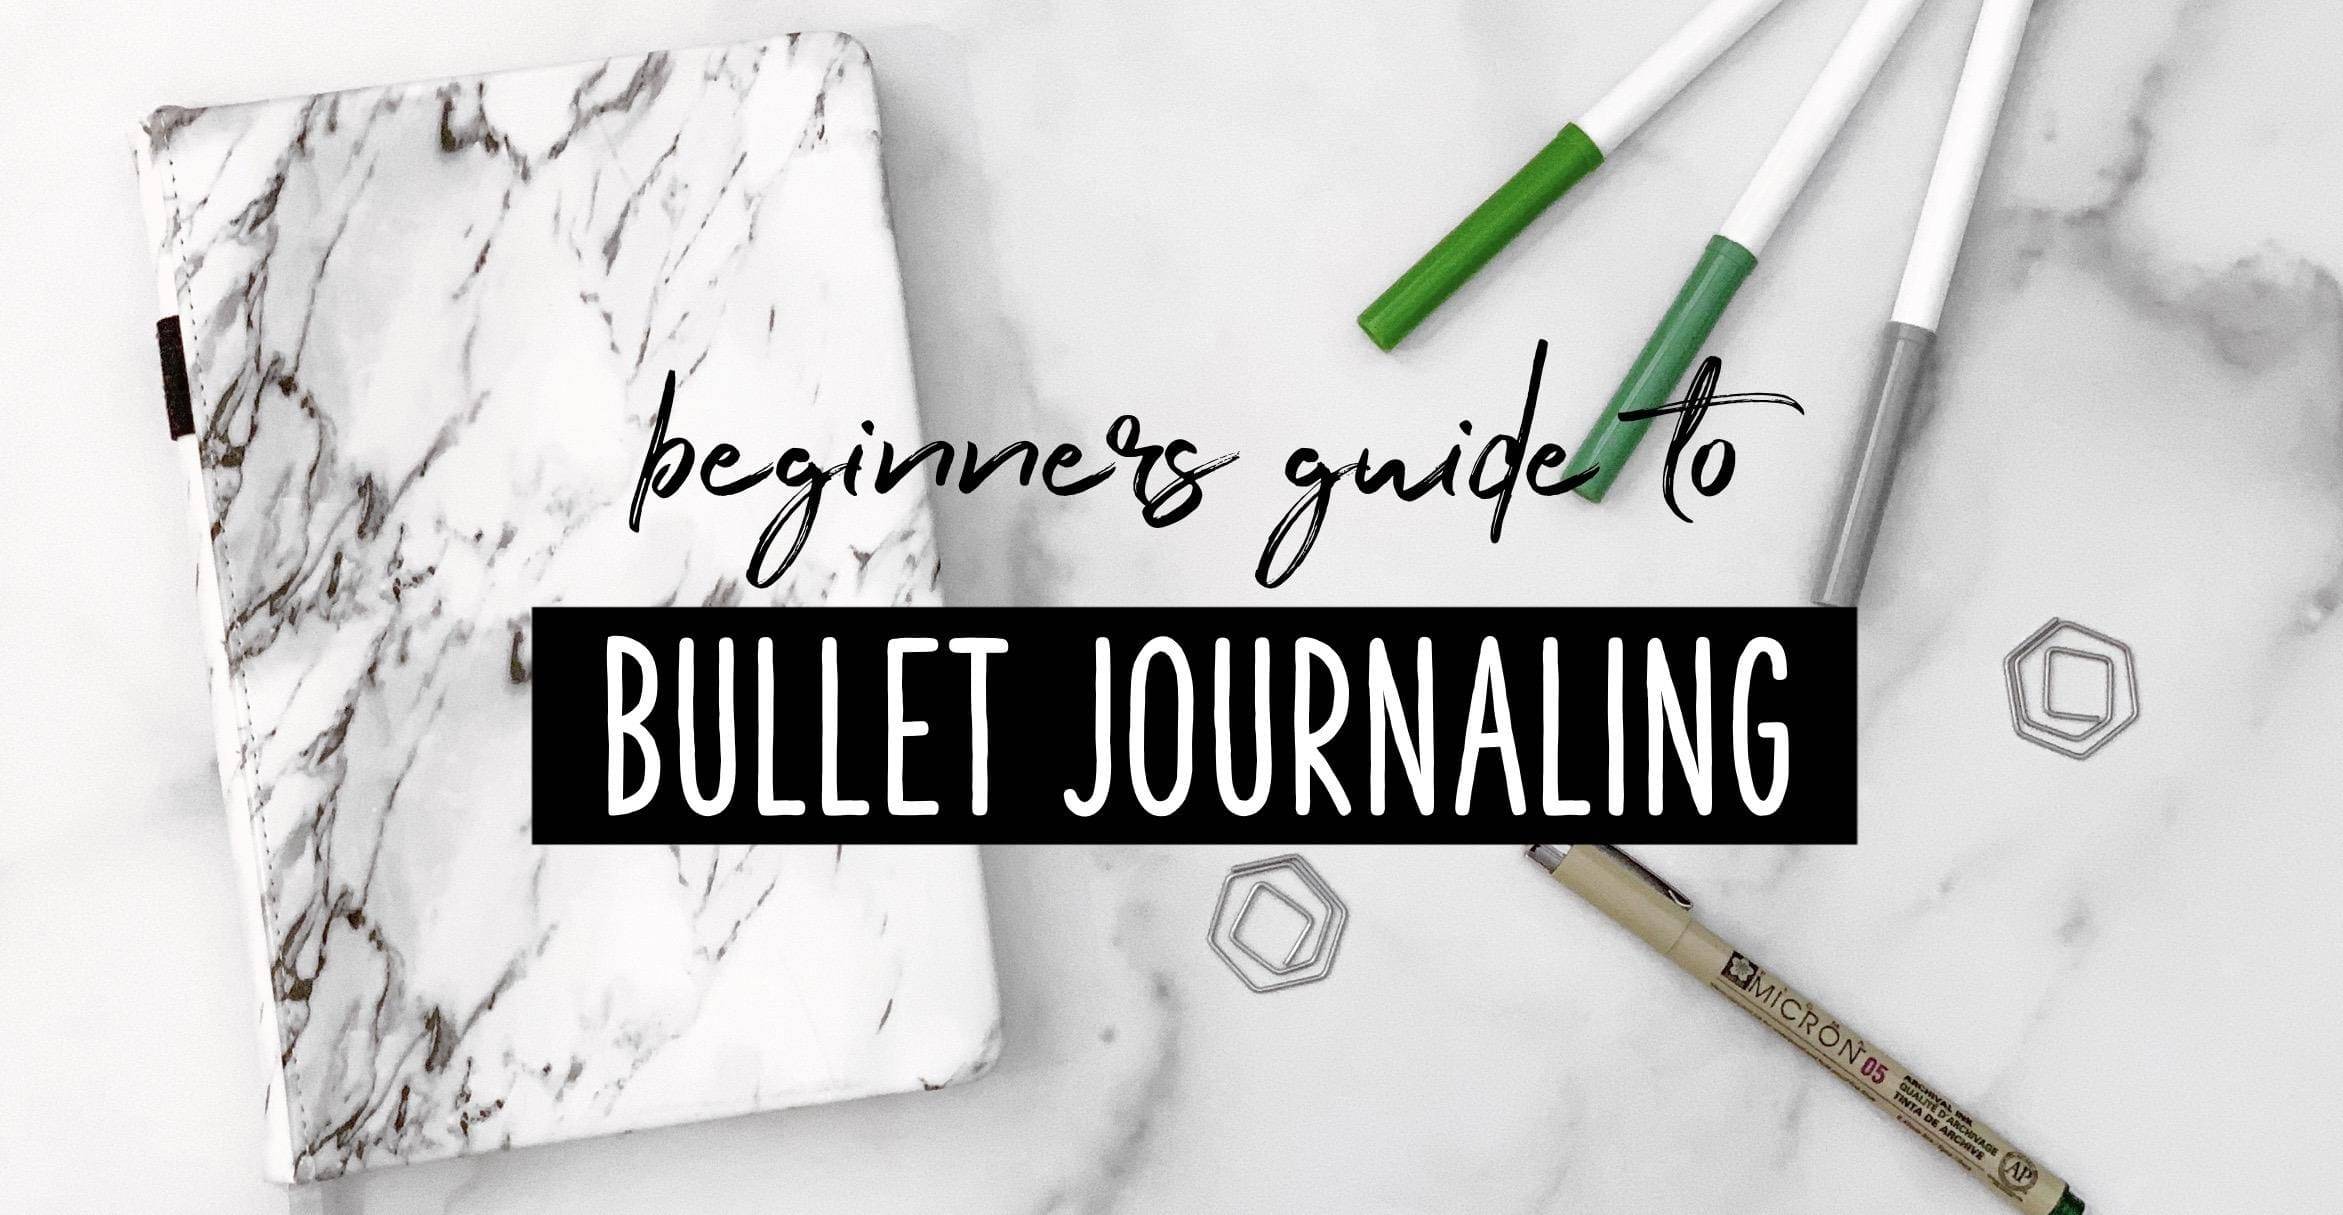 Beginners Guide to Bullet Journaling